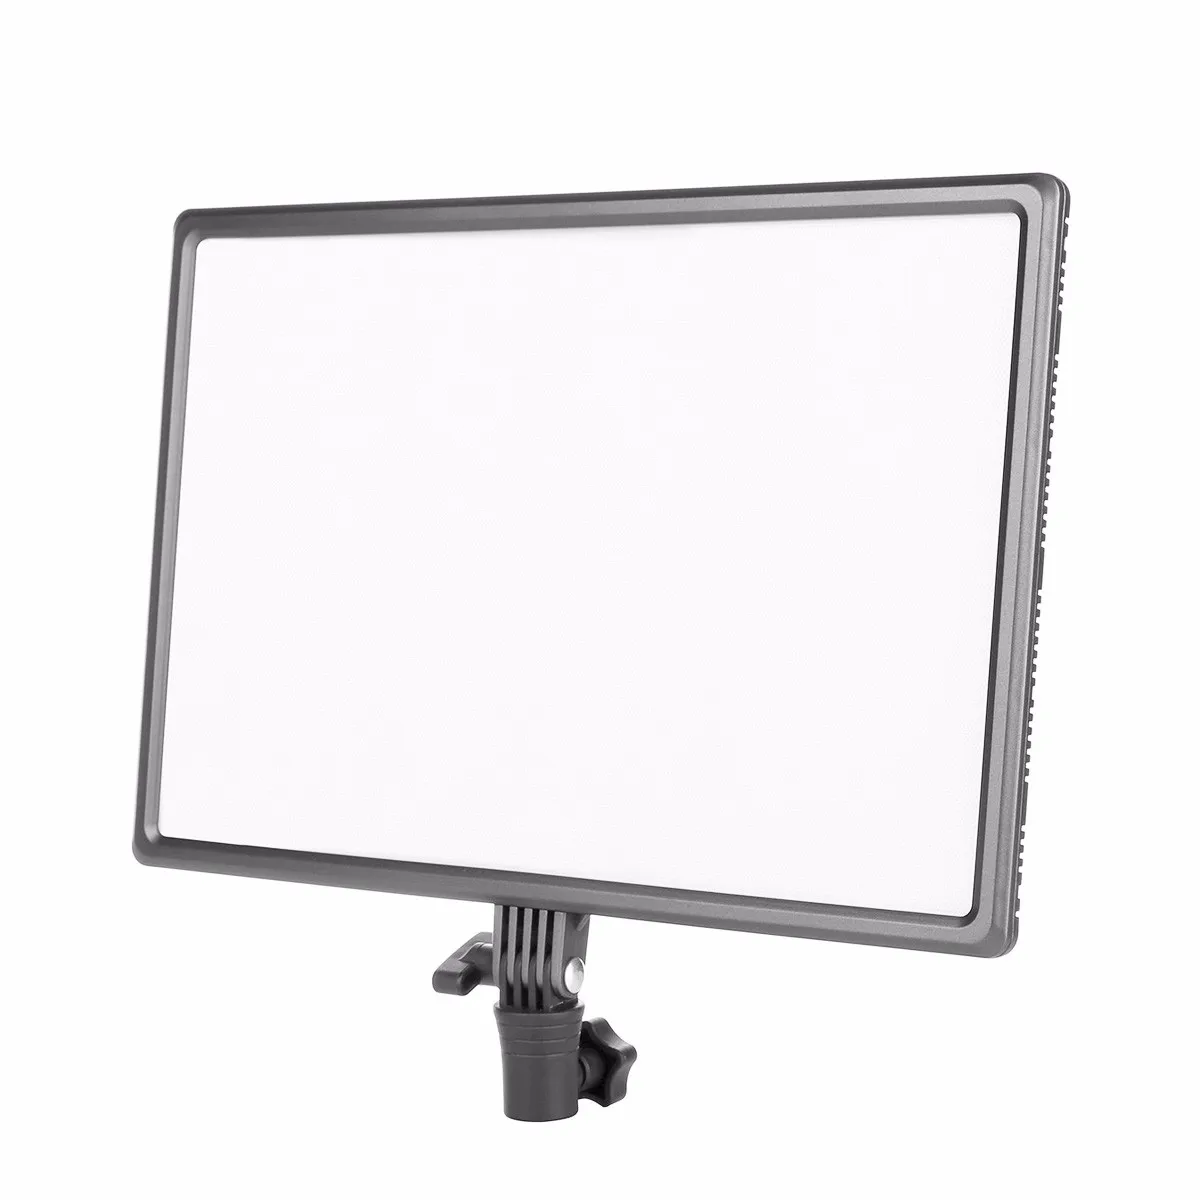 

Nanguang CN-Luxpad43 Dimmable 3200K-5600K LED Led video light for Canon Panasonic Sony Samsung and Olympus DSLR Cameras